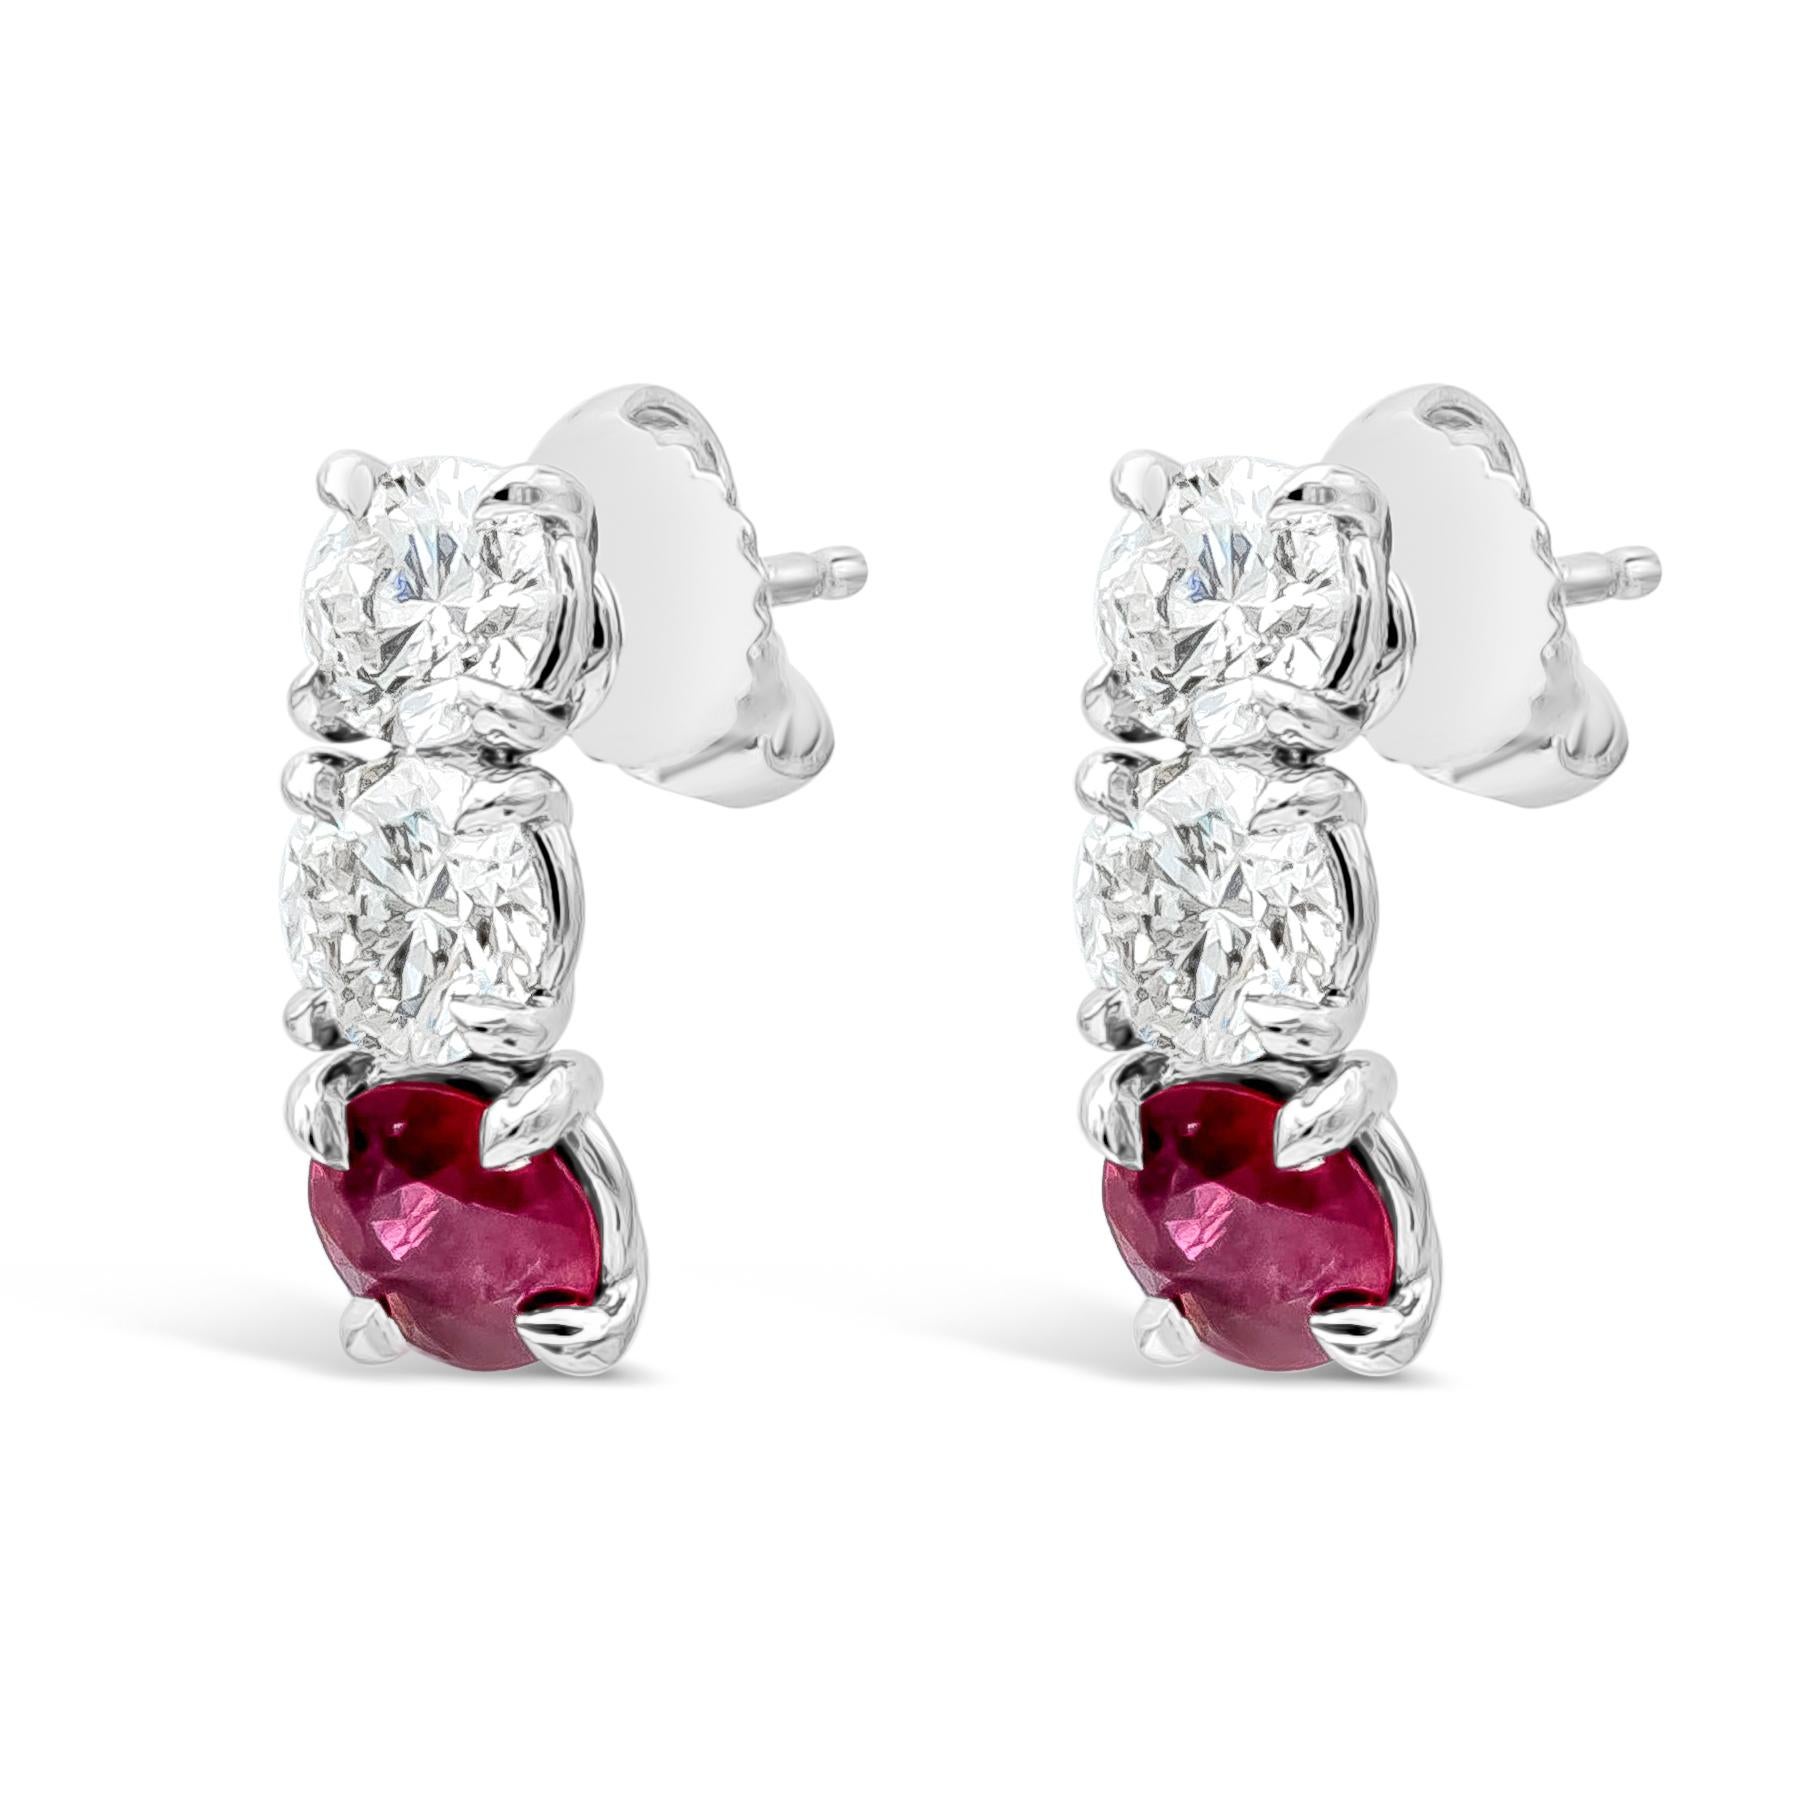 A simple and very stylish piece of jewelry features a three-stone drop earrings showcasing burma rubies weighing 1.39 carats total, and round white diamonds weighing 1.72 carats total, F Color and SI in Clarity. Set in a classic 4 prong setting,